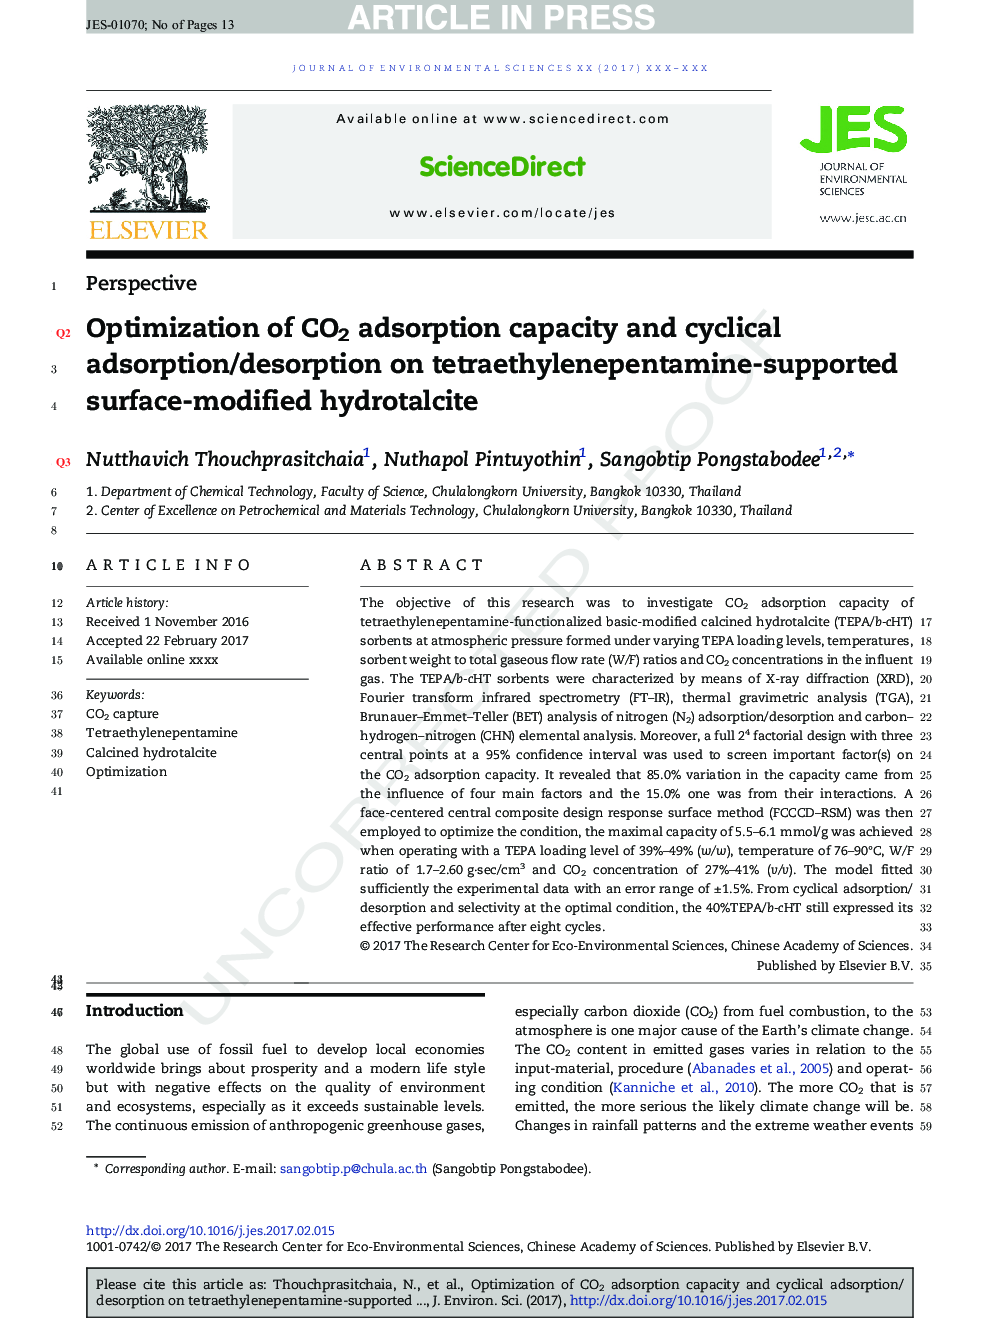 Optimization of CO2 adsorption capacity and cyclical adsorption/desorption on tetraethylenepentamine-supported surface-modified hydrotalcite